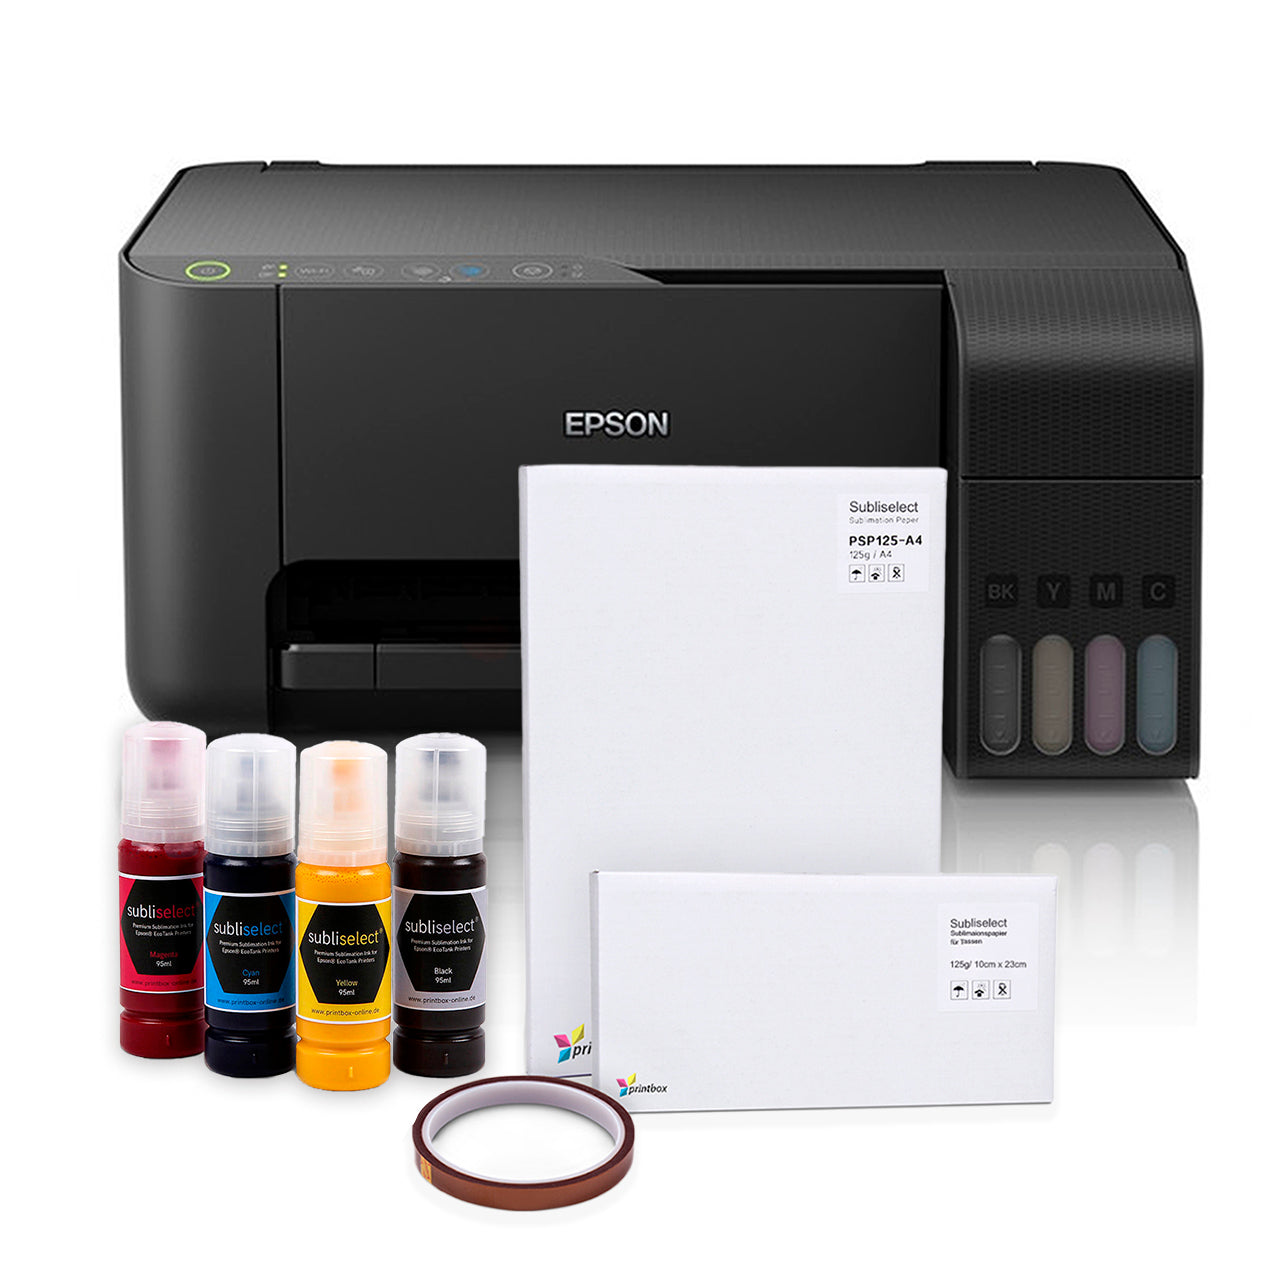 Epson® DIN A4 ECOTANK sublimation printer with Subliselect® starter package